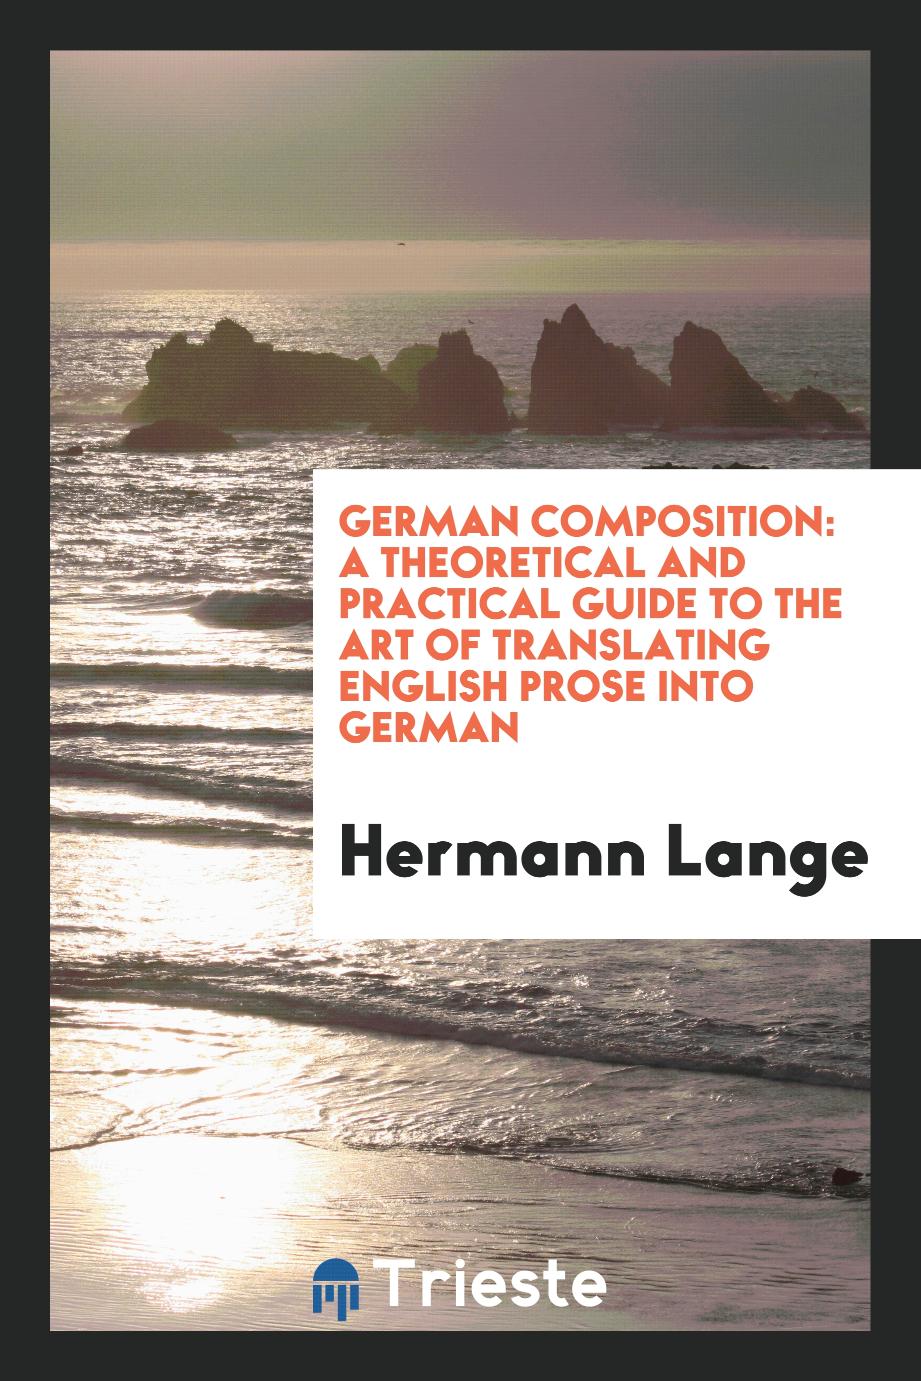 German composition: a theoretical and practical guide to the art of translating English prose into German